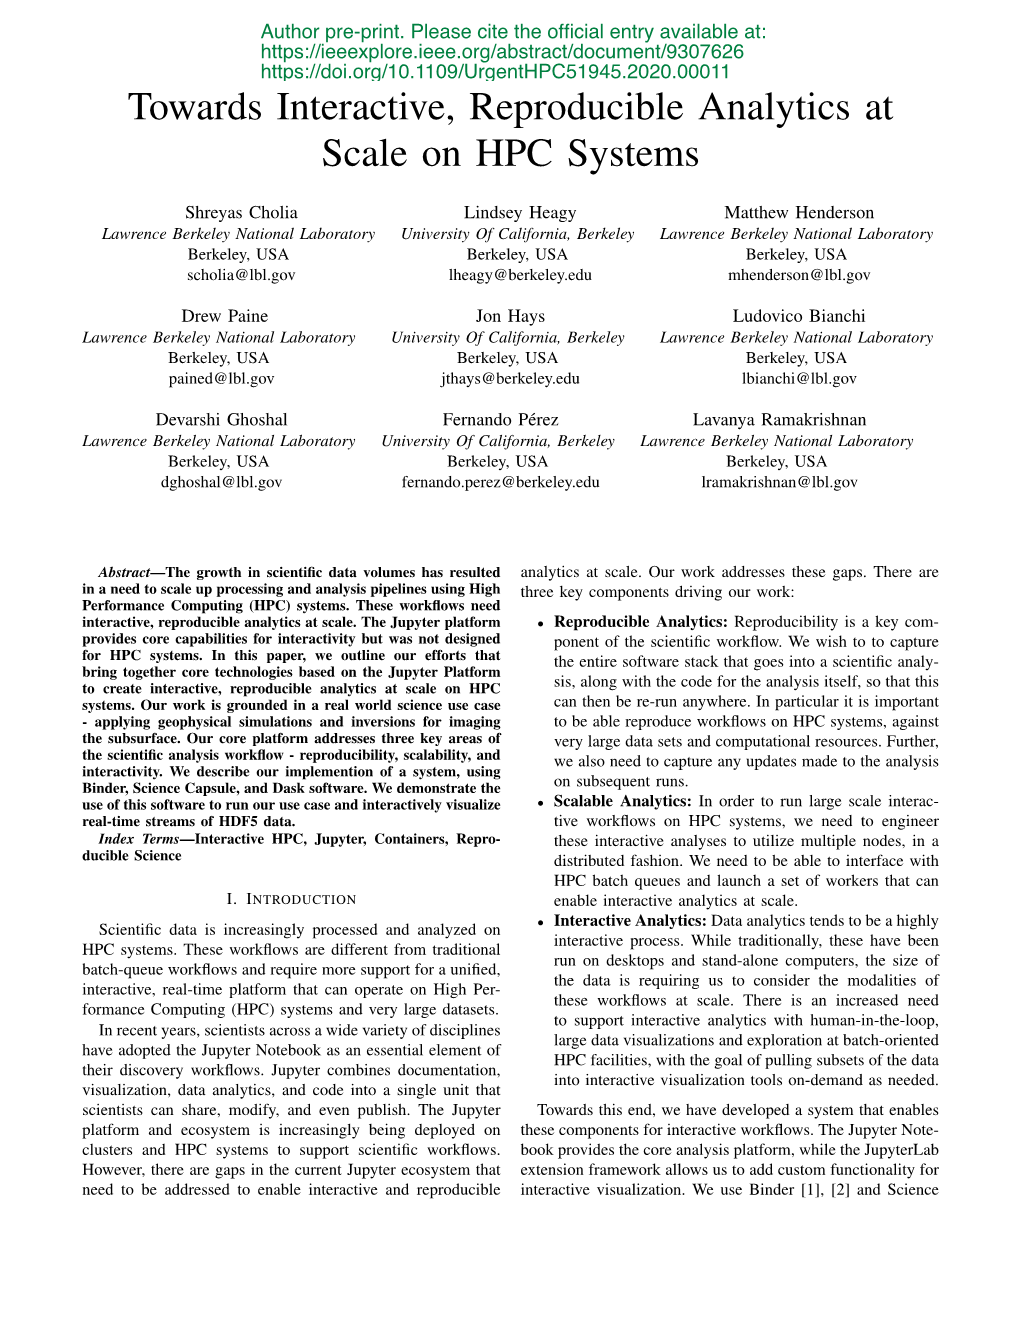 Towards Interactive, Reproducible Analytics at Scale on HPC Systems